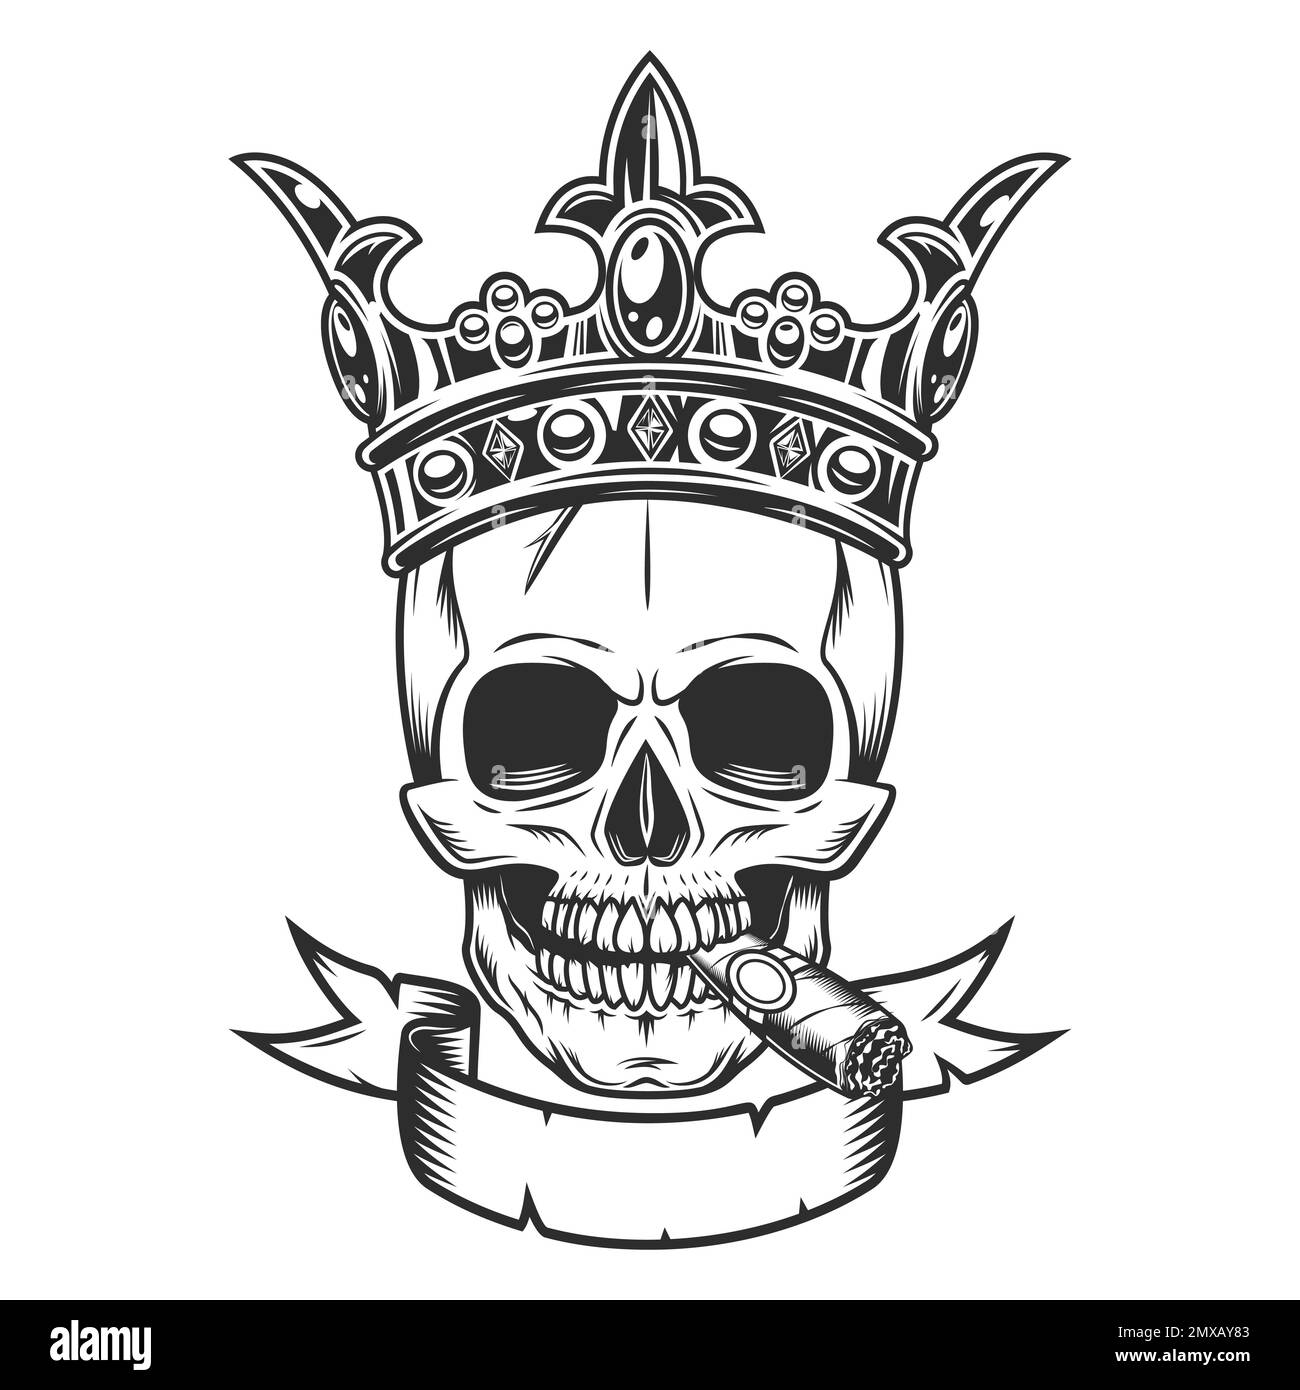 Skull smoking cigar or cigarette smoke in crown king with crossed swords and ribbon illustration. Vintage crowning, elegant queen or king crowns Stock Photo